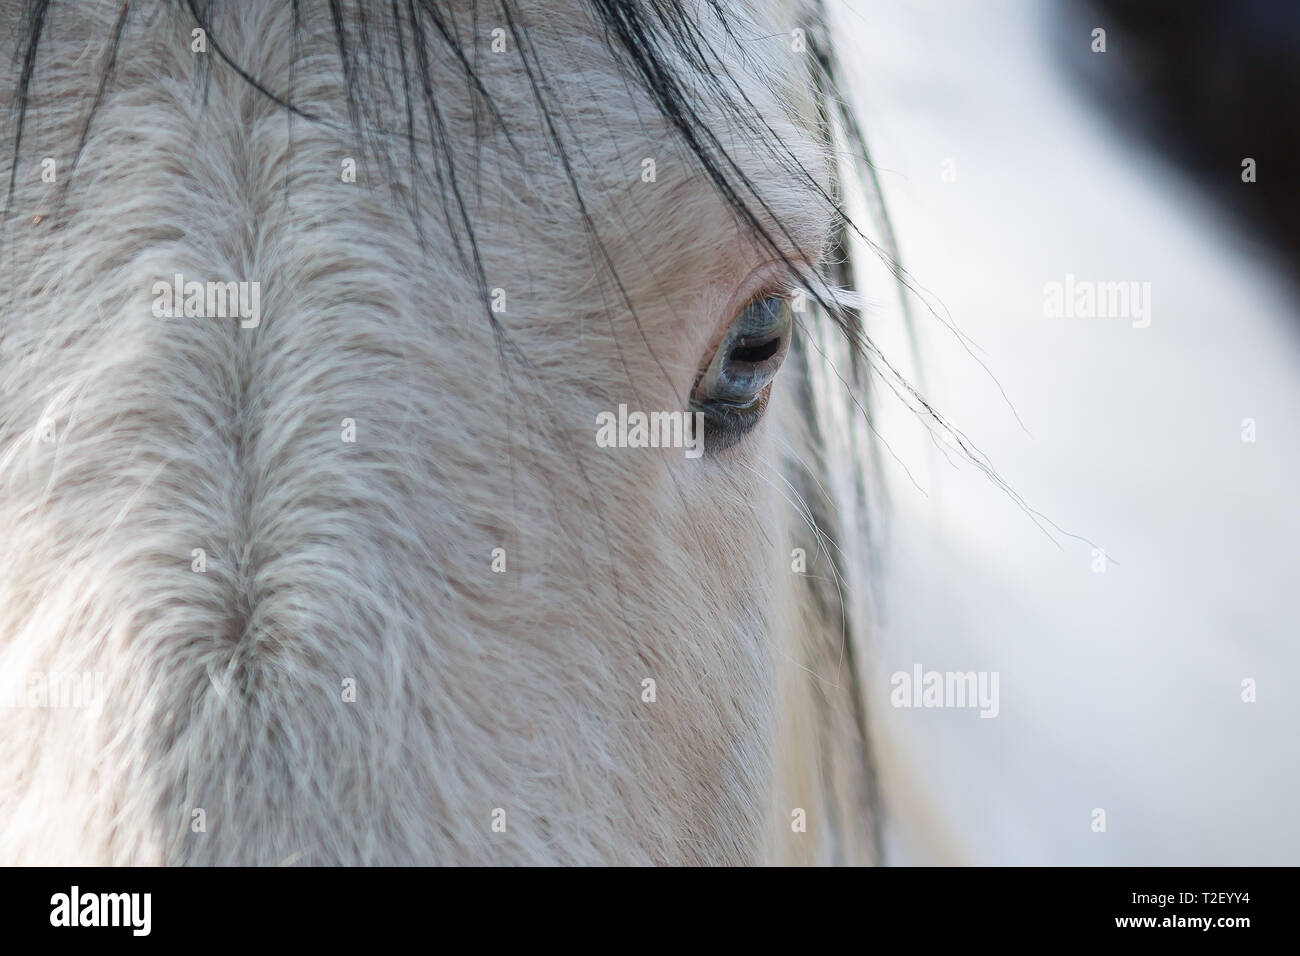 Detailed close up of a white horse's face taken from the front with focus on left blue eye of horse. Effective negative space gives useful copy space. Stock Photo